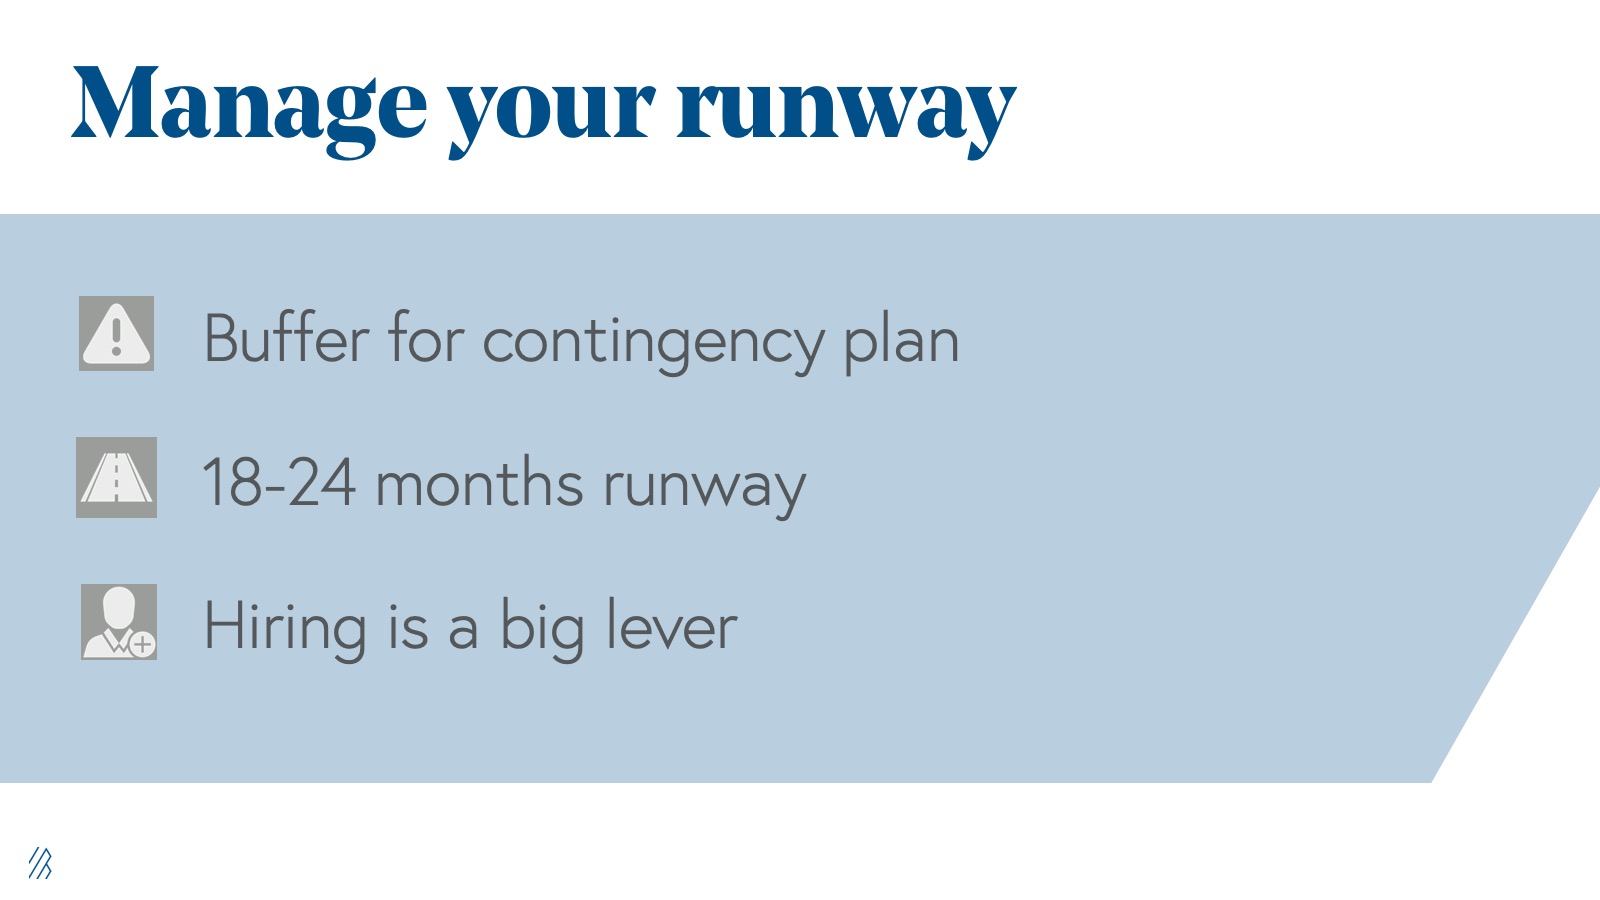 How to manage your runway.